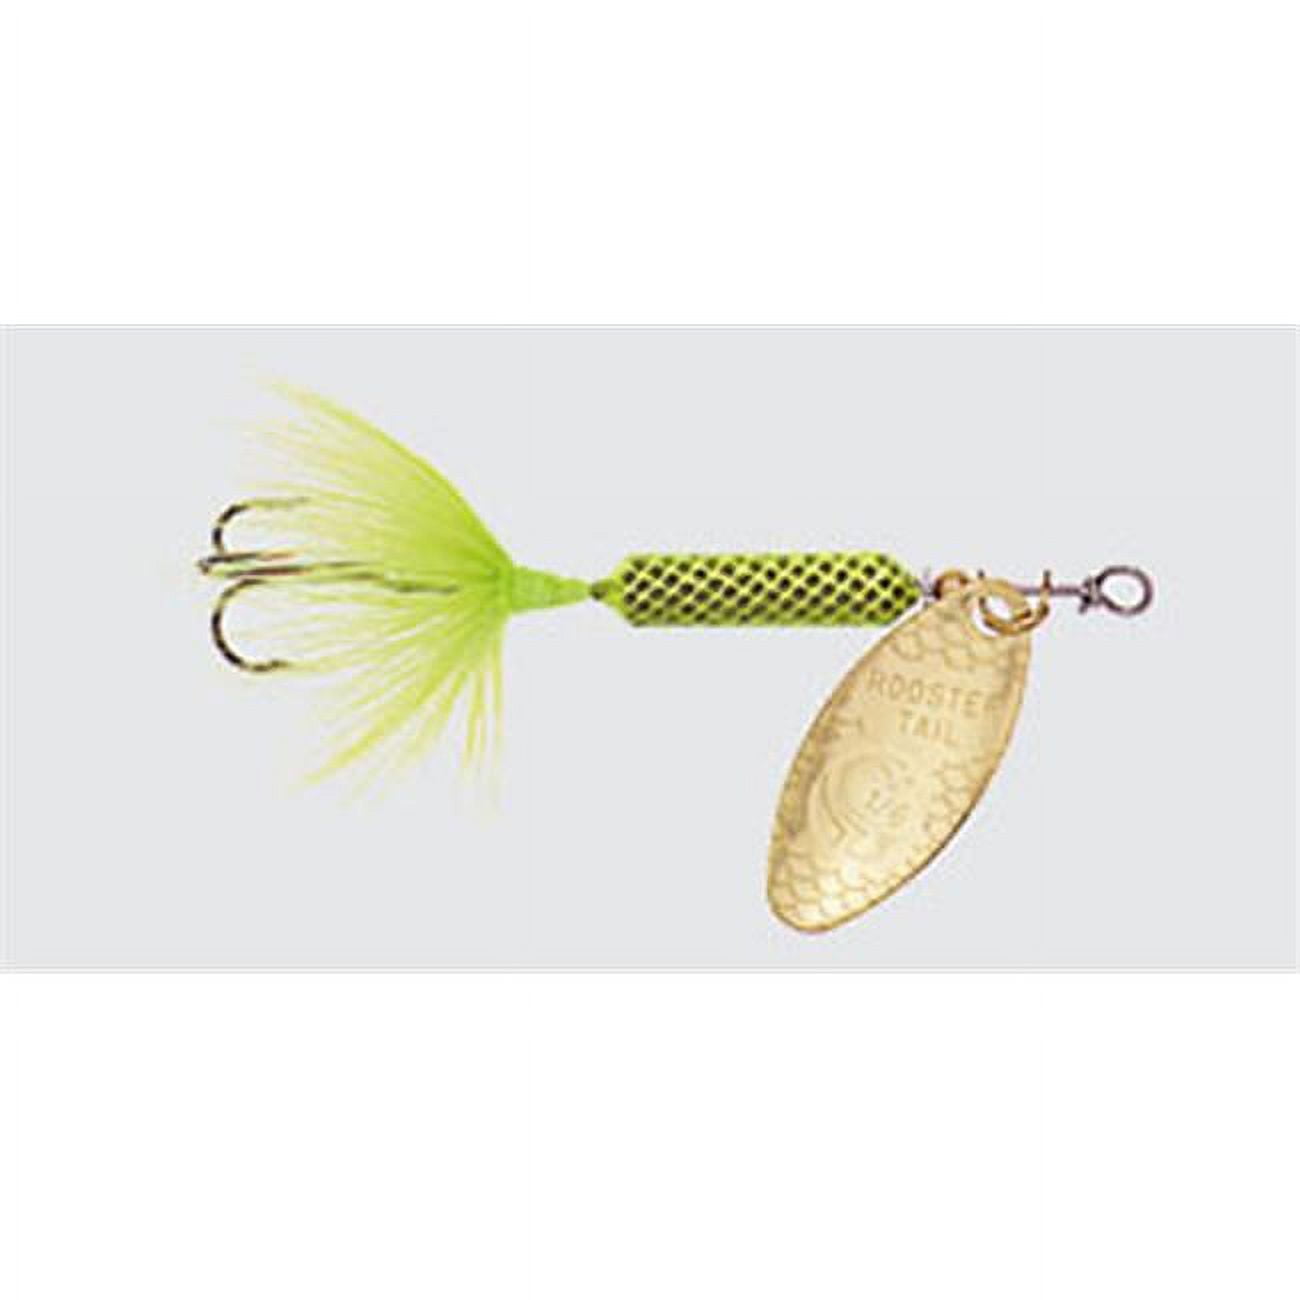 Yakima Rooster Tails 0.12 oz Original Rooster Tail - Hammered Chartreuse